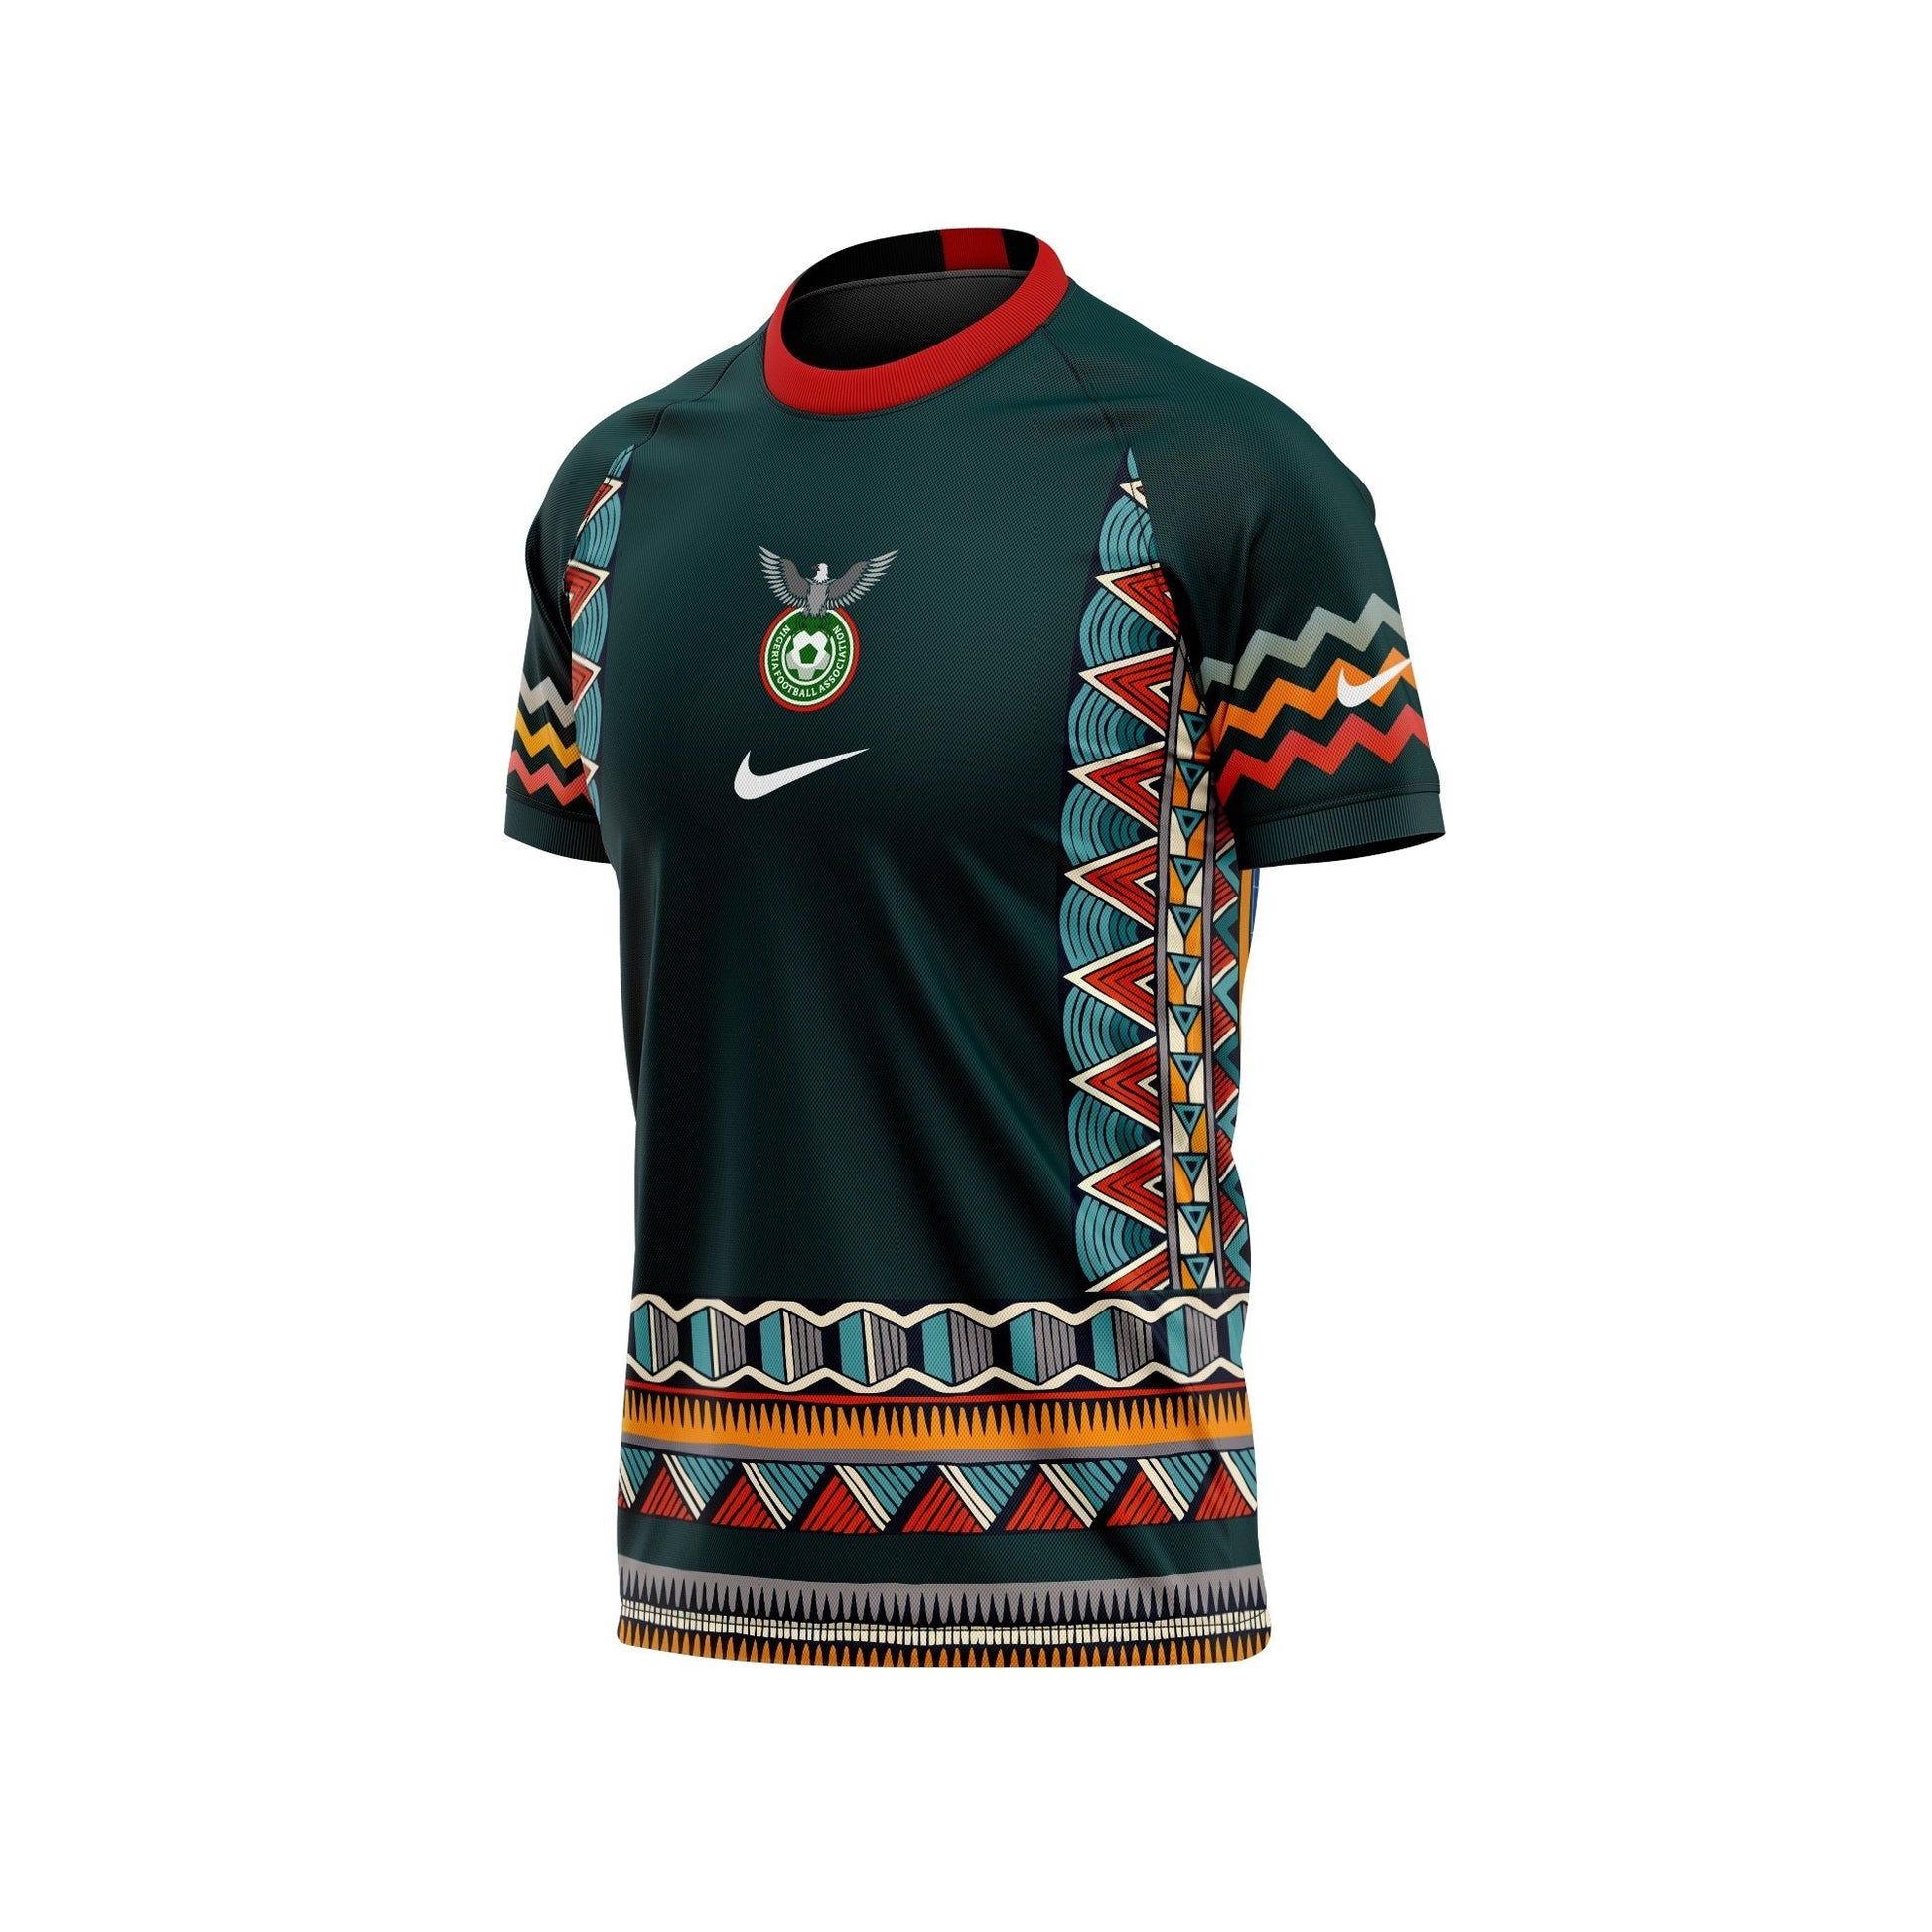 thelegalgang,Customized Football Jersey - Nigeria Concept,JERSEY.